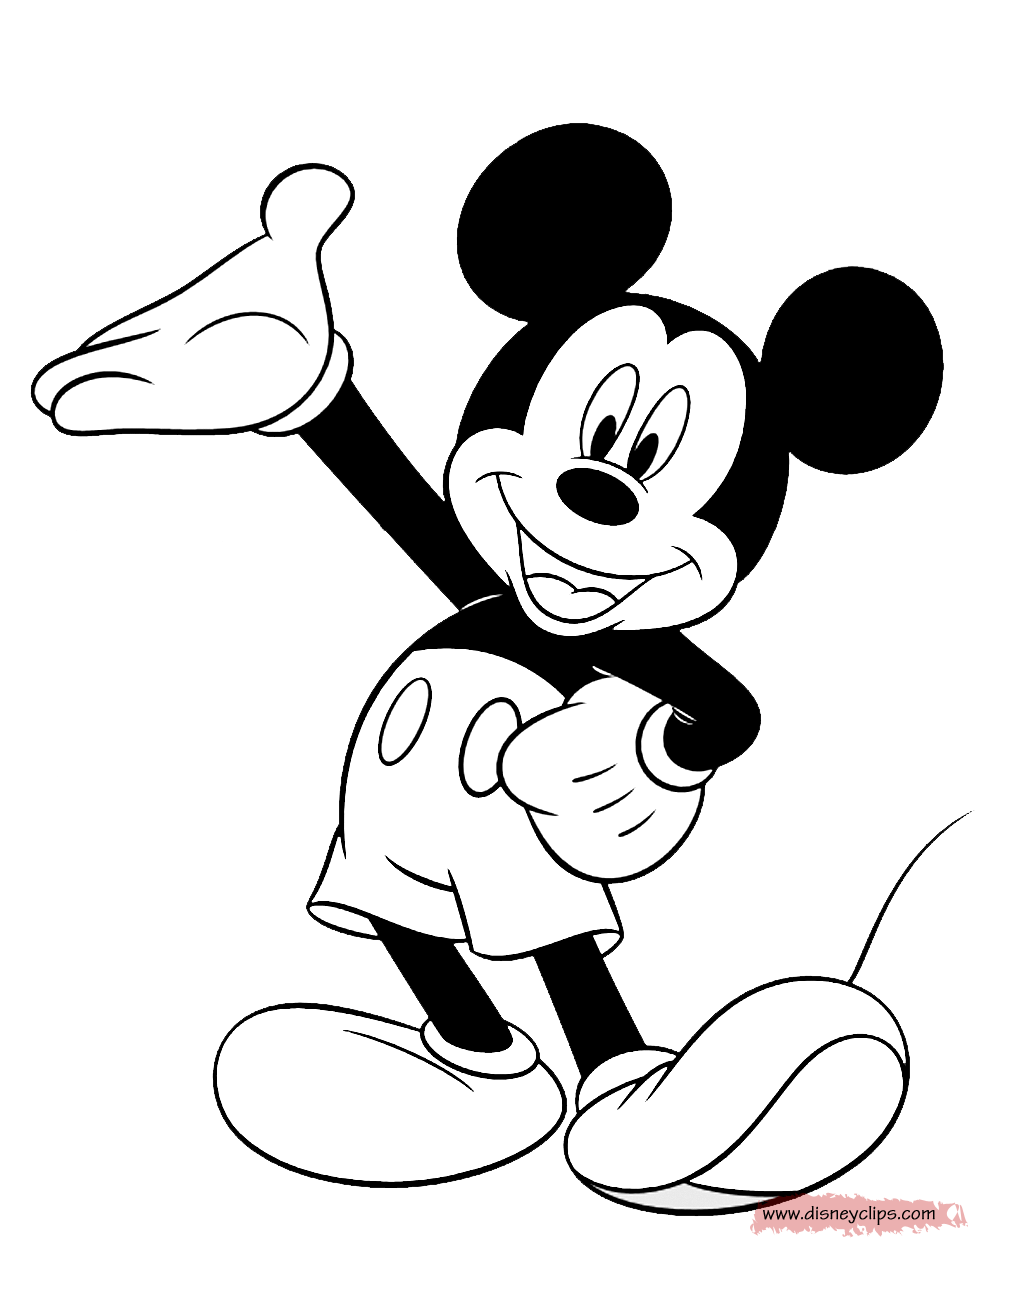 mickey-mouse-coloring-pages-7-disney-s-world-of-wonders